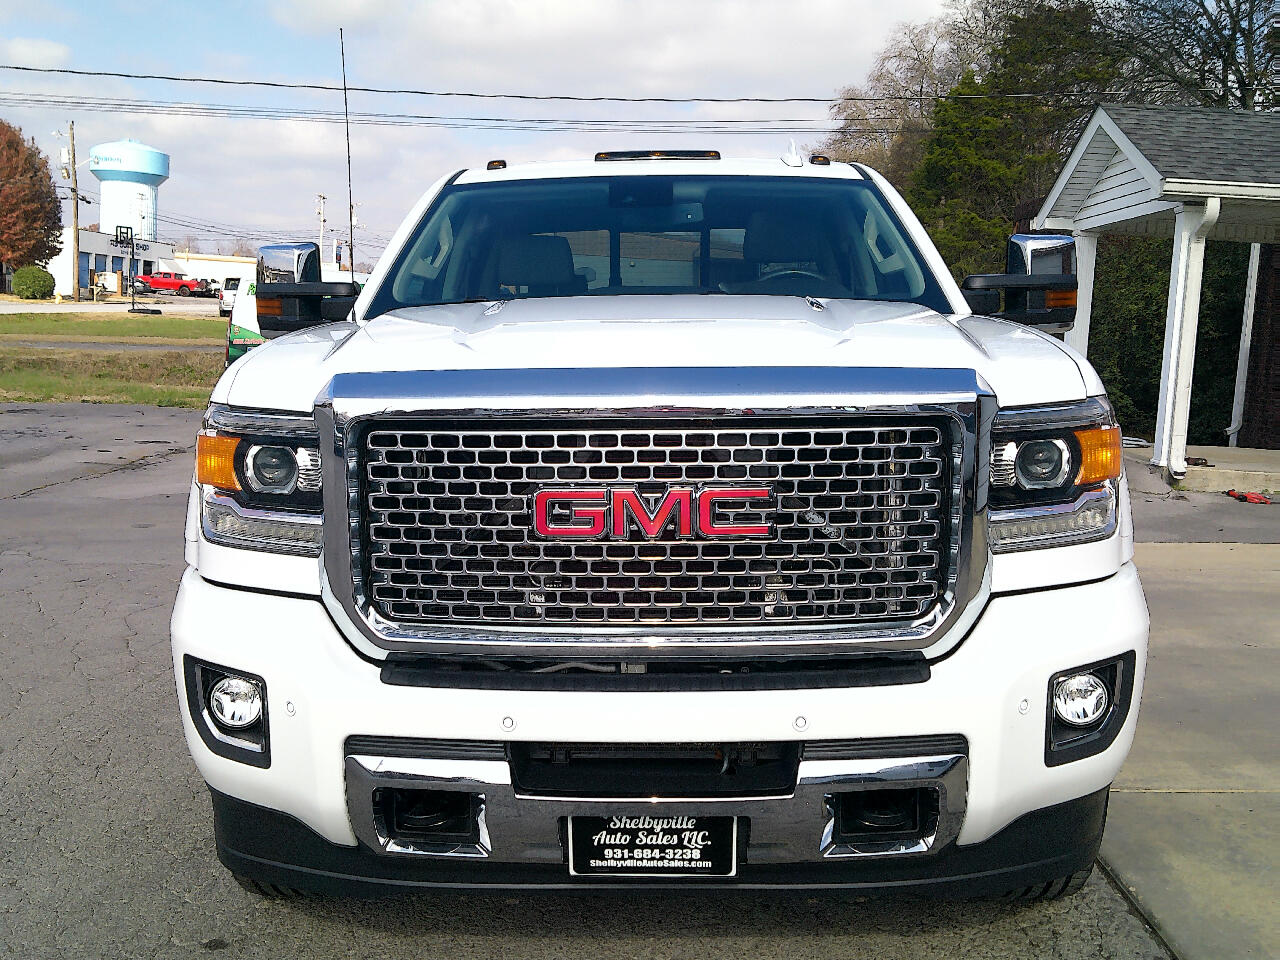 2016 GMC Sierra 2500HD WE PRICE OUR VEHICLES TO SELLPLEASE CALL TO CONFIRM AV